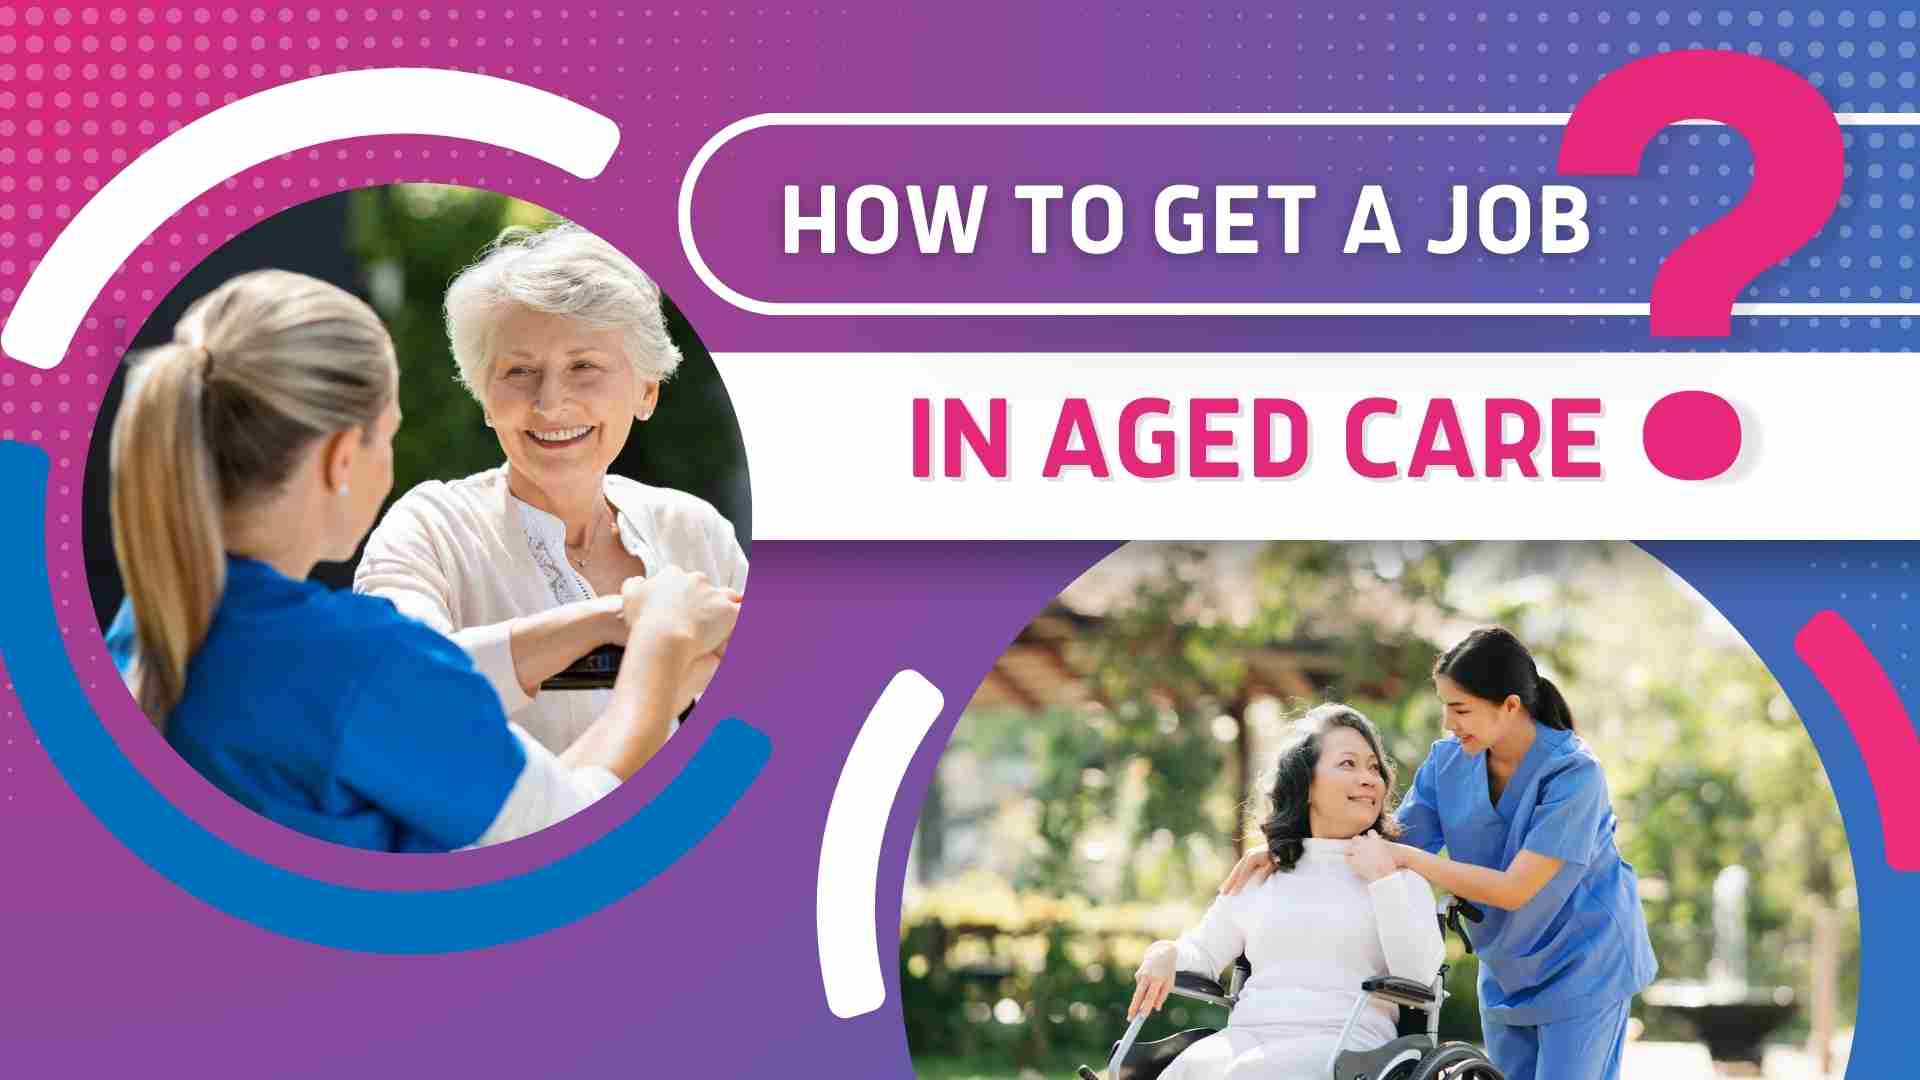 Get a job in aged care